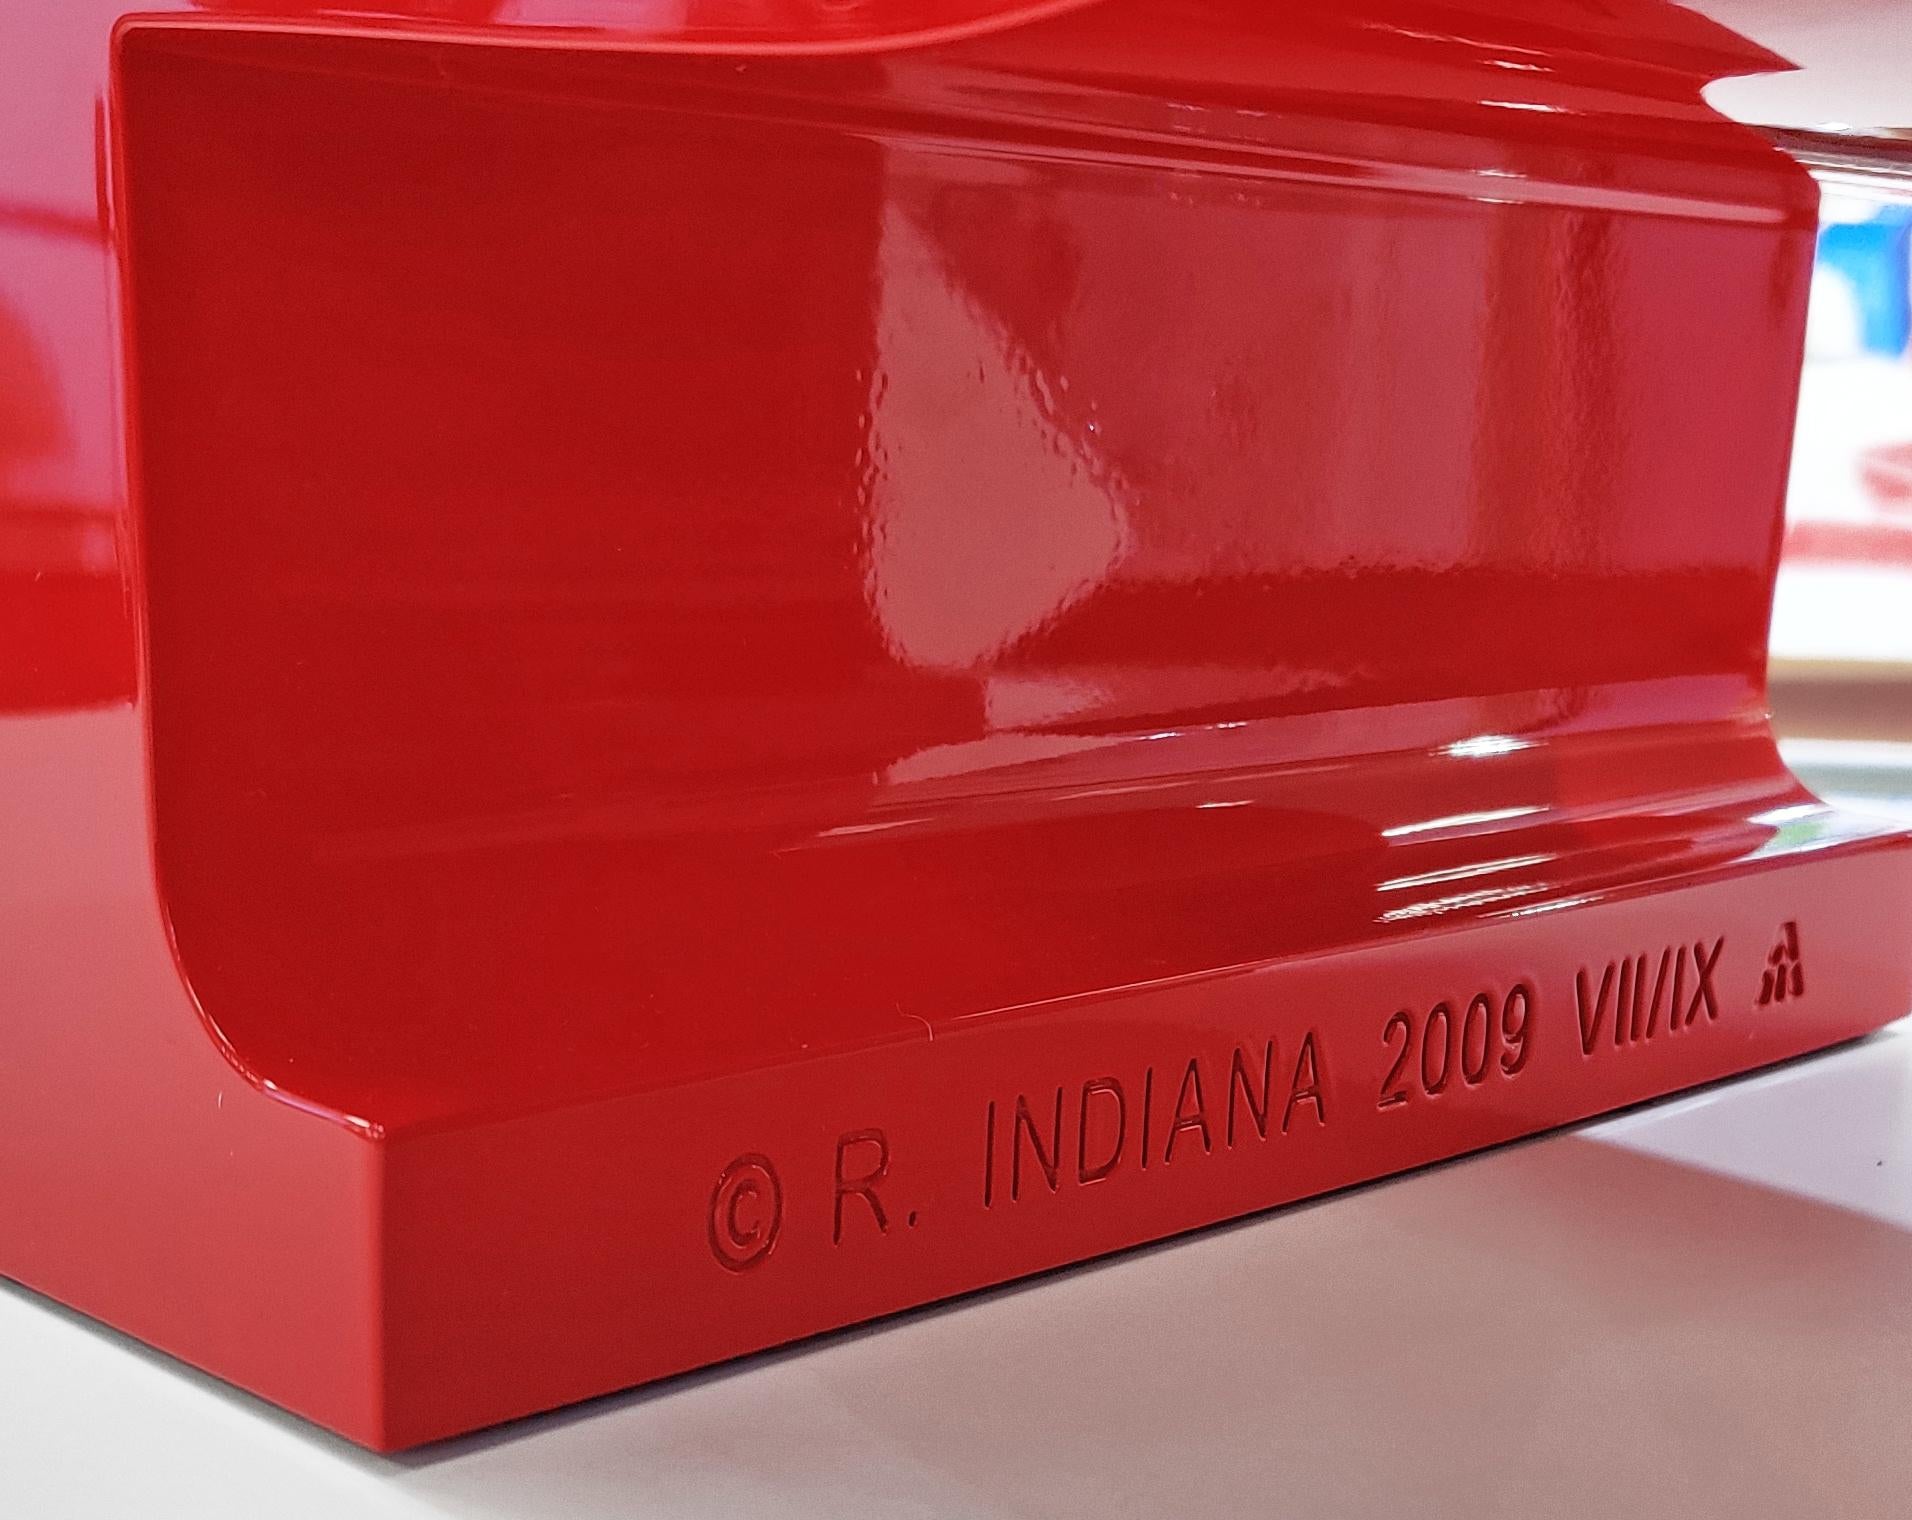 Painted aluminum sculpture.   Measures 18 x 18 x 9 inches.   Stamped 'R. Indiana' with edition and date.  Edition VII/IX.

Artwork is in excellent condition.  All reasonable offers will be considered.


About the Artist: Robert Indiana (1928–2018)